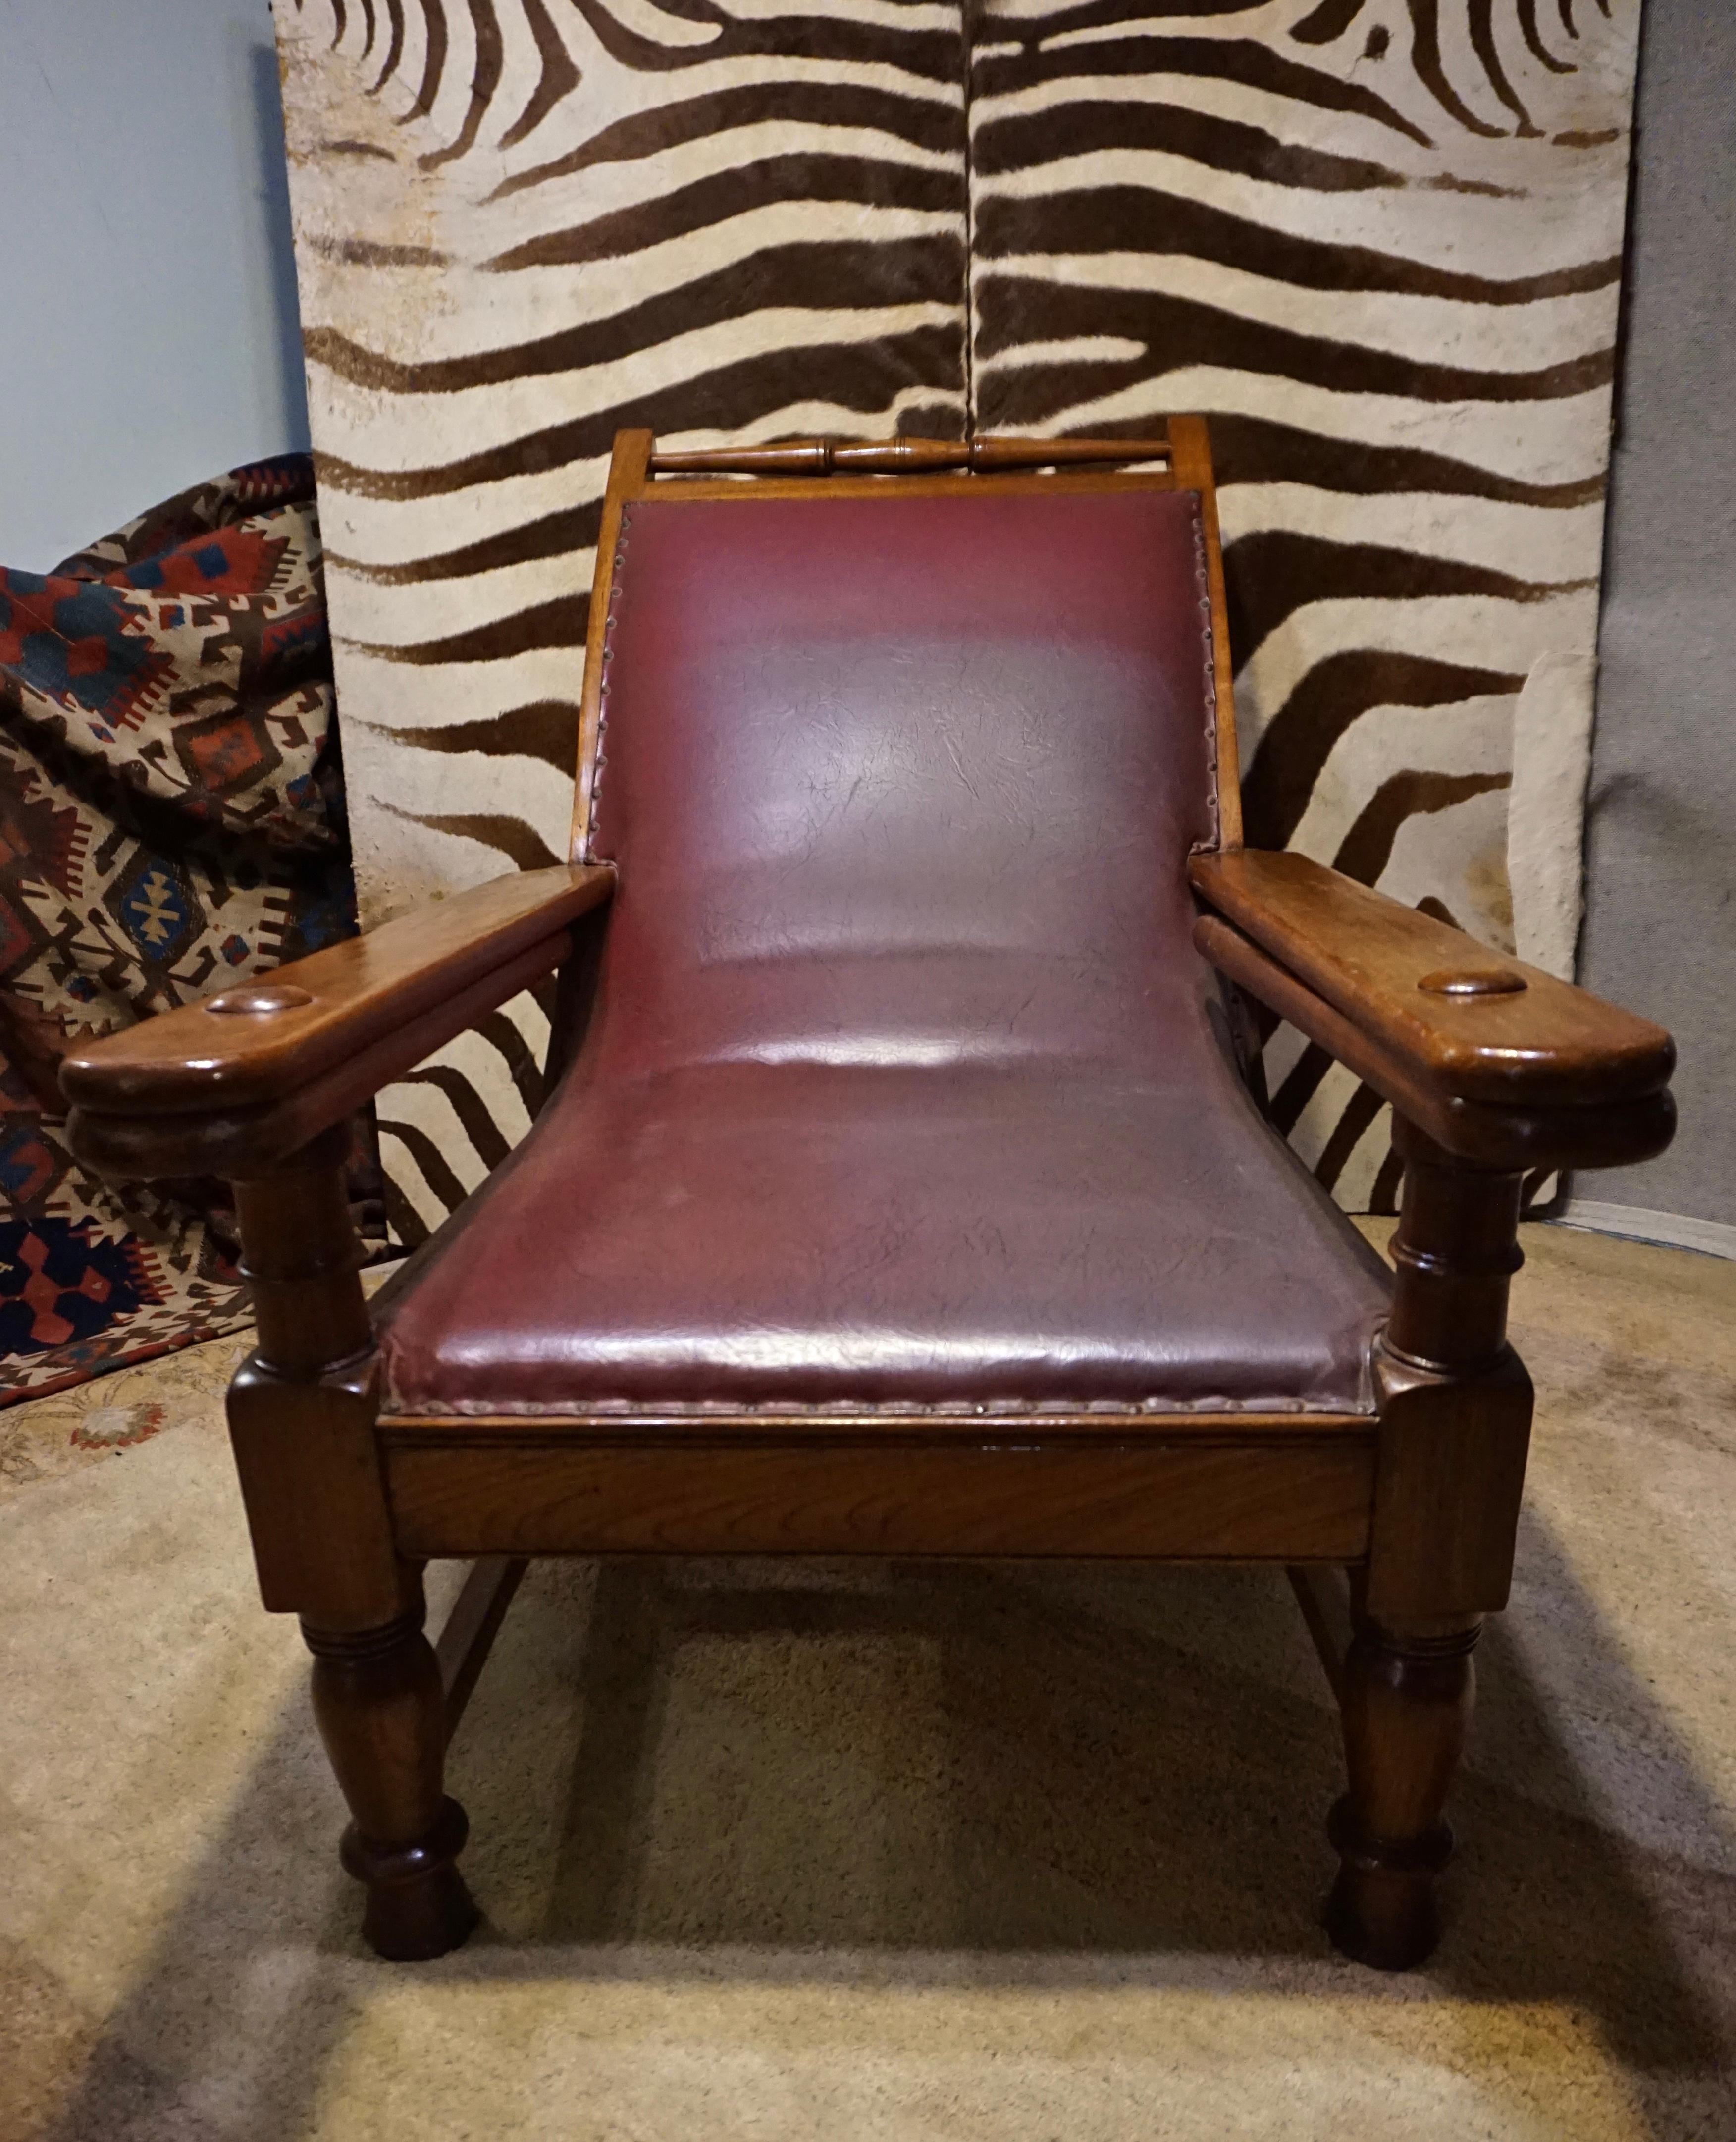 Indian 19th Century British Colonial Tea Plantation Teak & Leather Lounge Chair For Sale